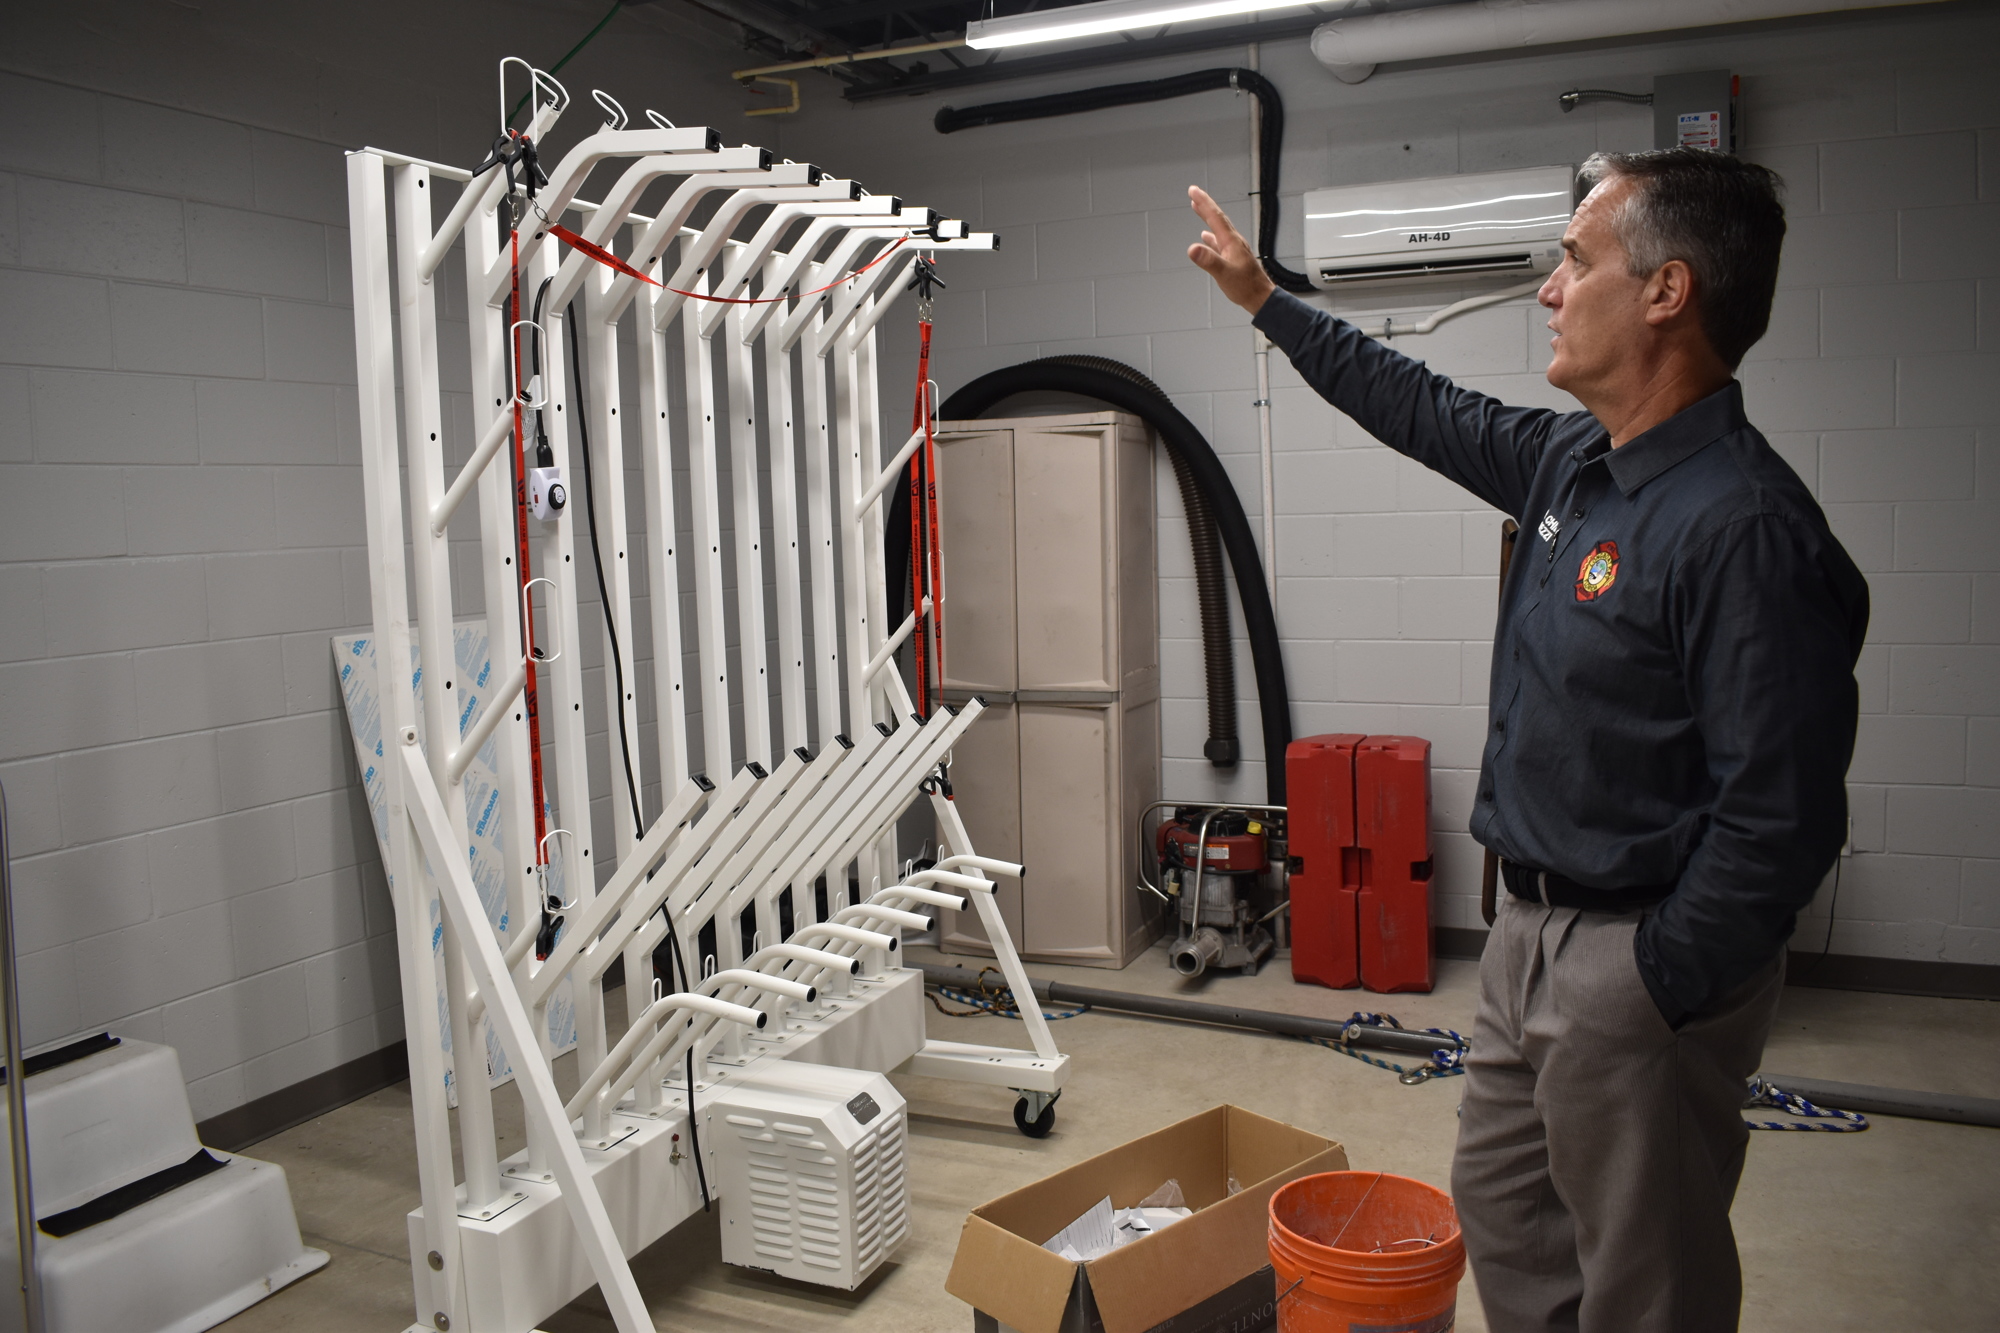 Fire Chief Paul Dezzi demonstrates how machinery will help dry firefighters' equipment.